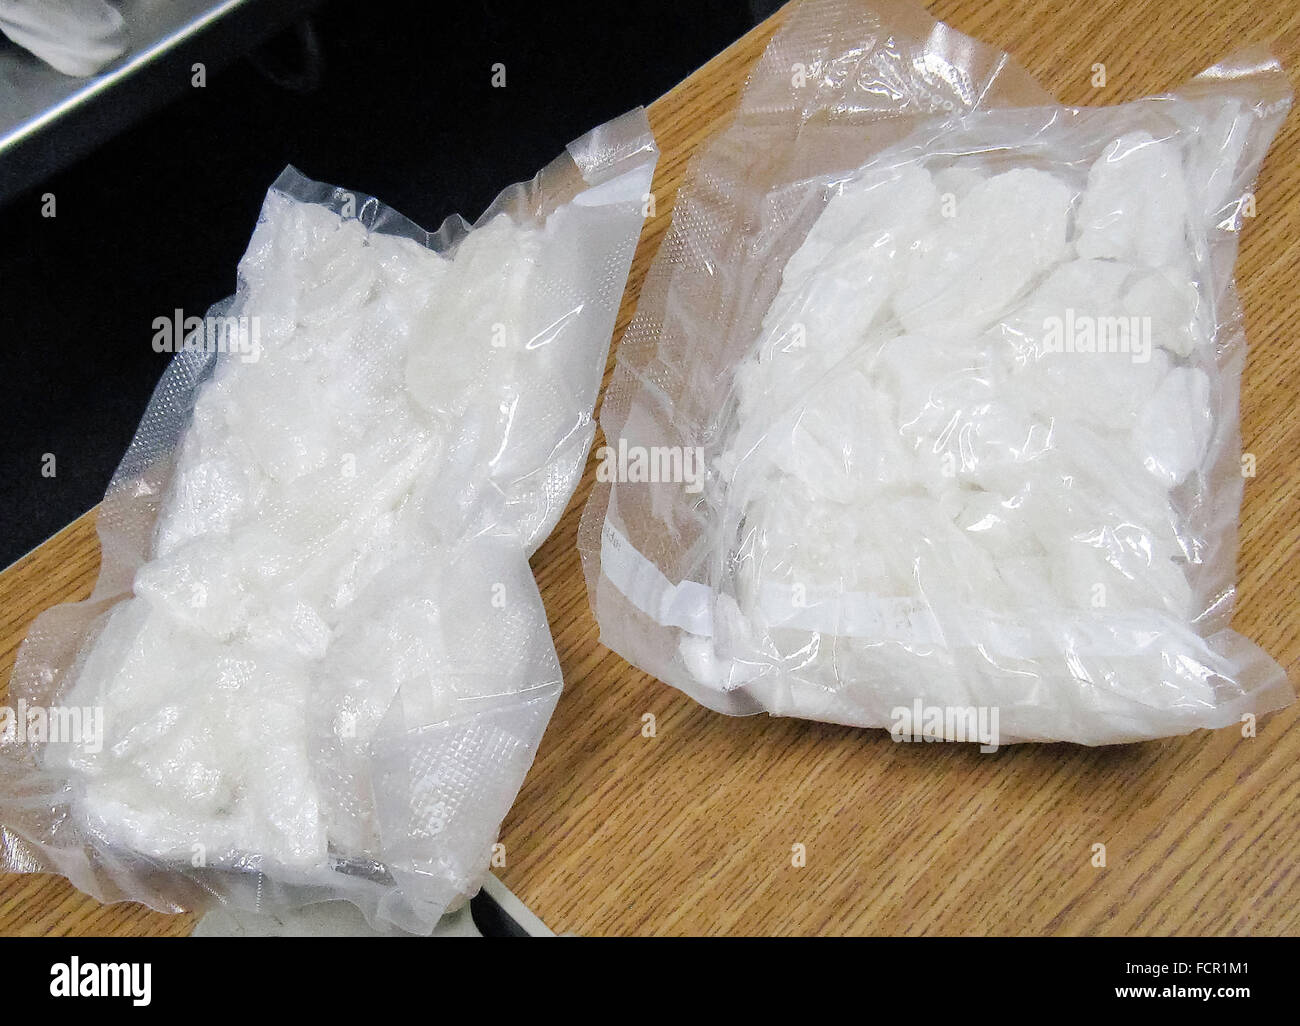 Vacumn packed bags of crystal meths (methanphimeine) intercepted by U.S. Customs and Border Protection at the San Luis port of entry in Arizona, US-Mexico border on 18 August 2013. Stock Photo